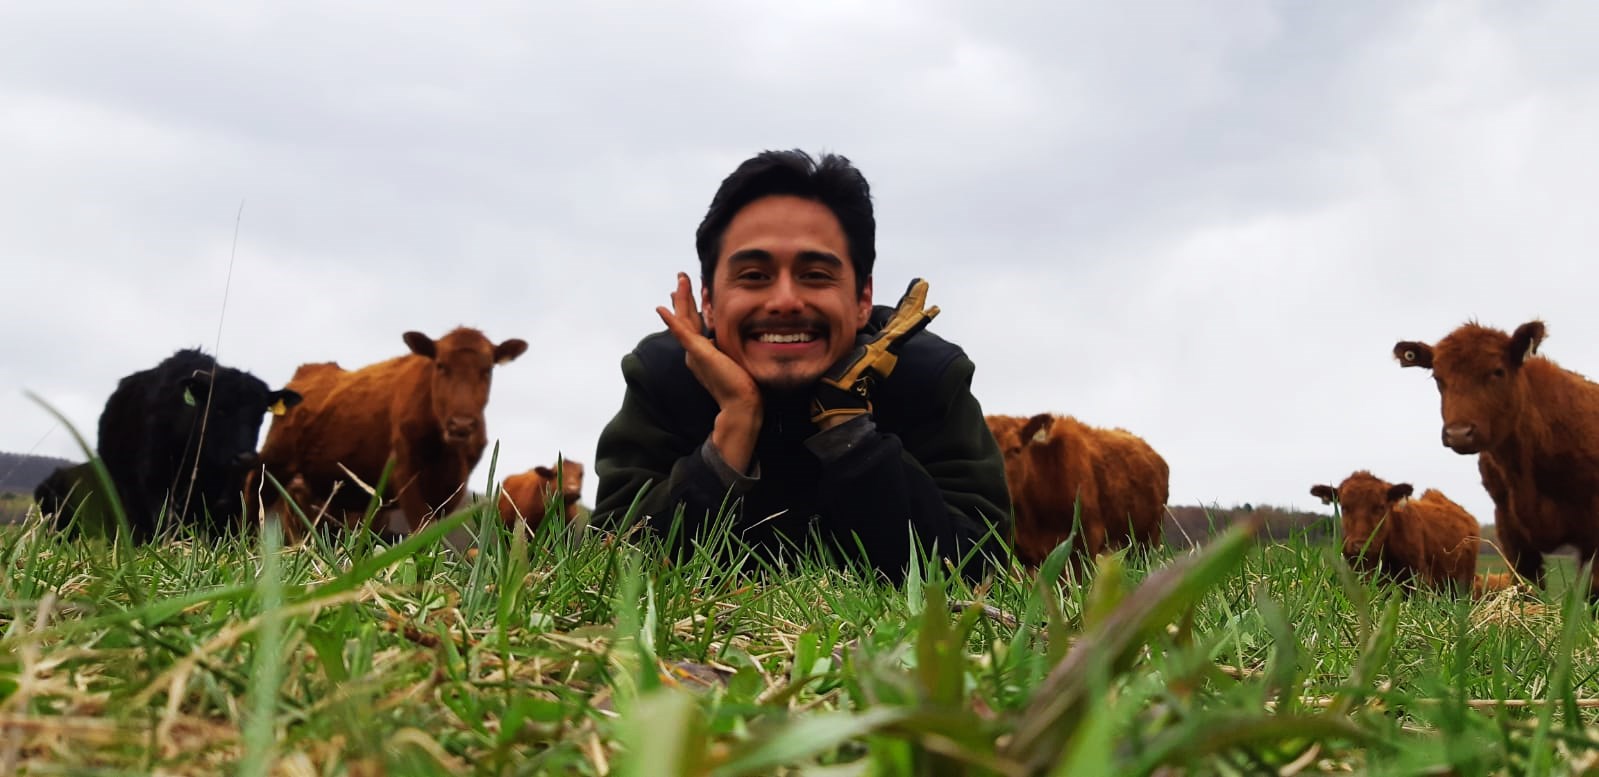 Big welcome to our grass, grazing and herd hand Carlos!